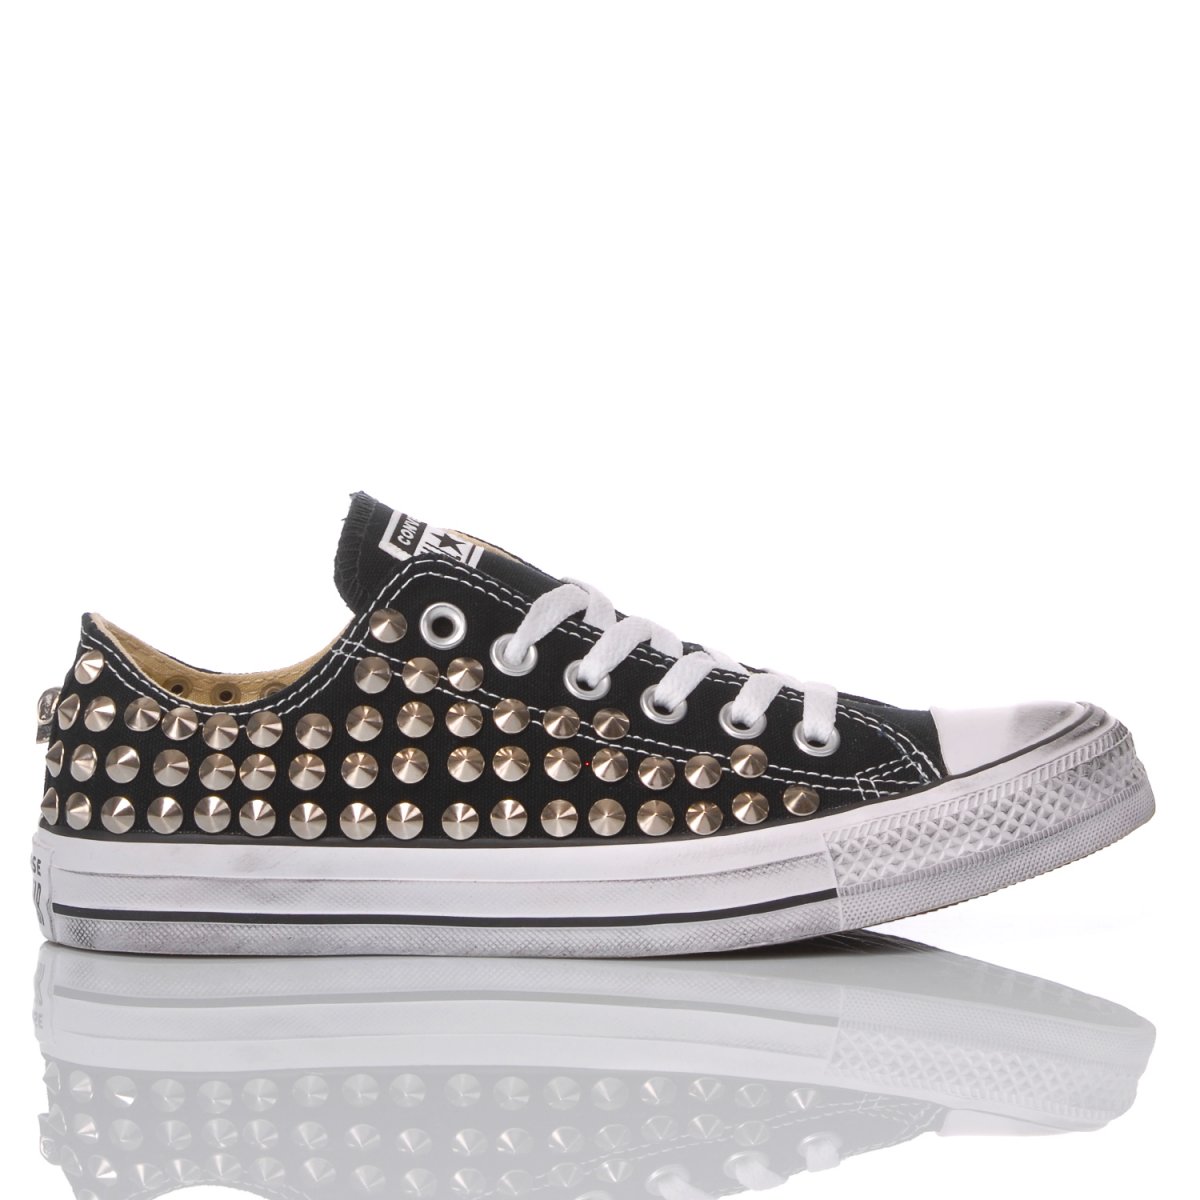 black converse with studs